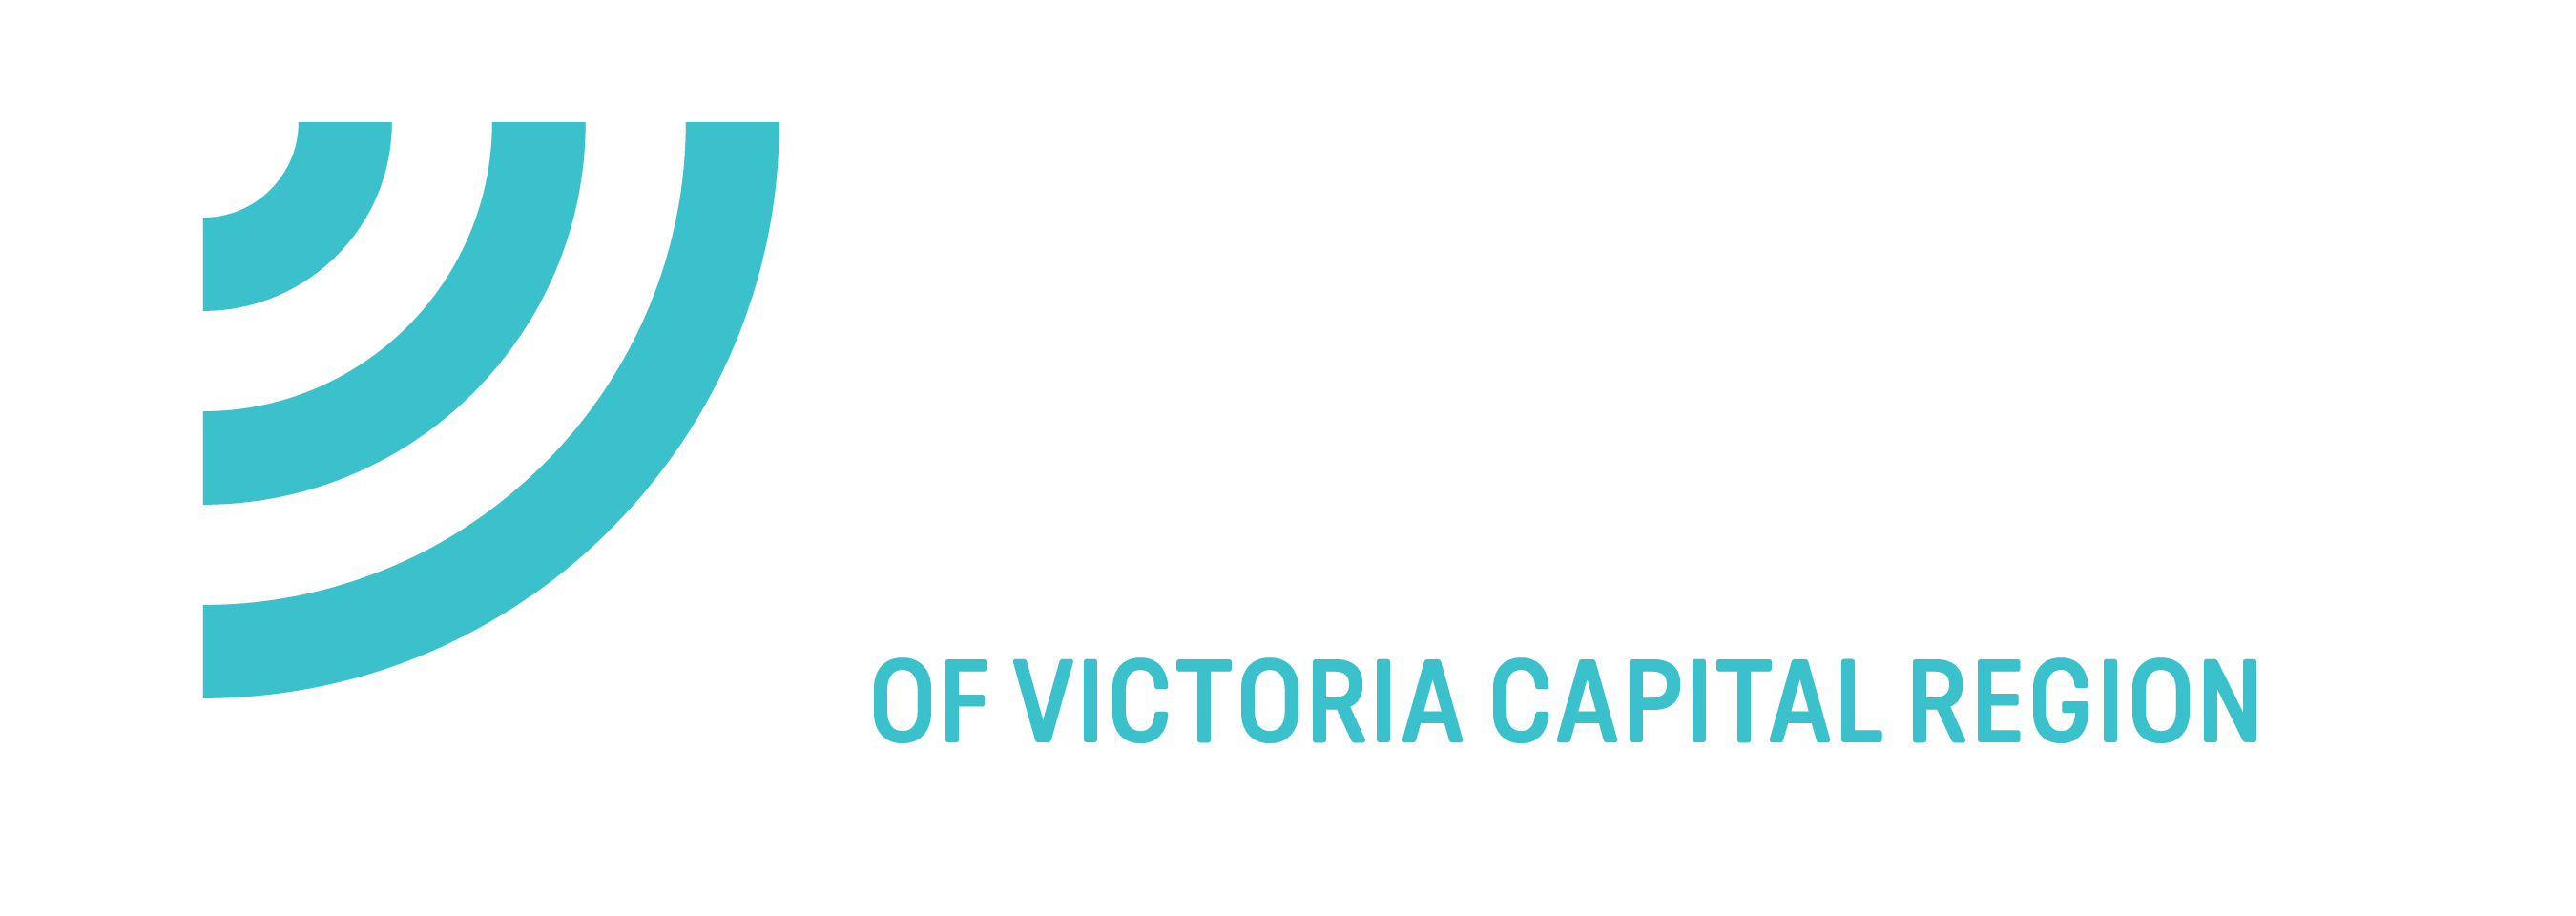 Events Archive - Big Brothers Big Sisters of Victoria Capital Region